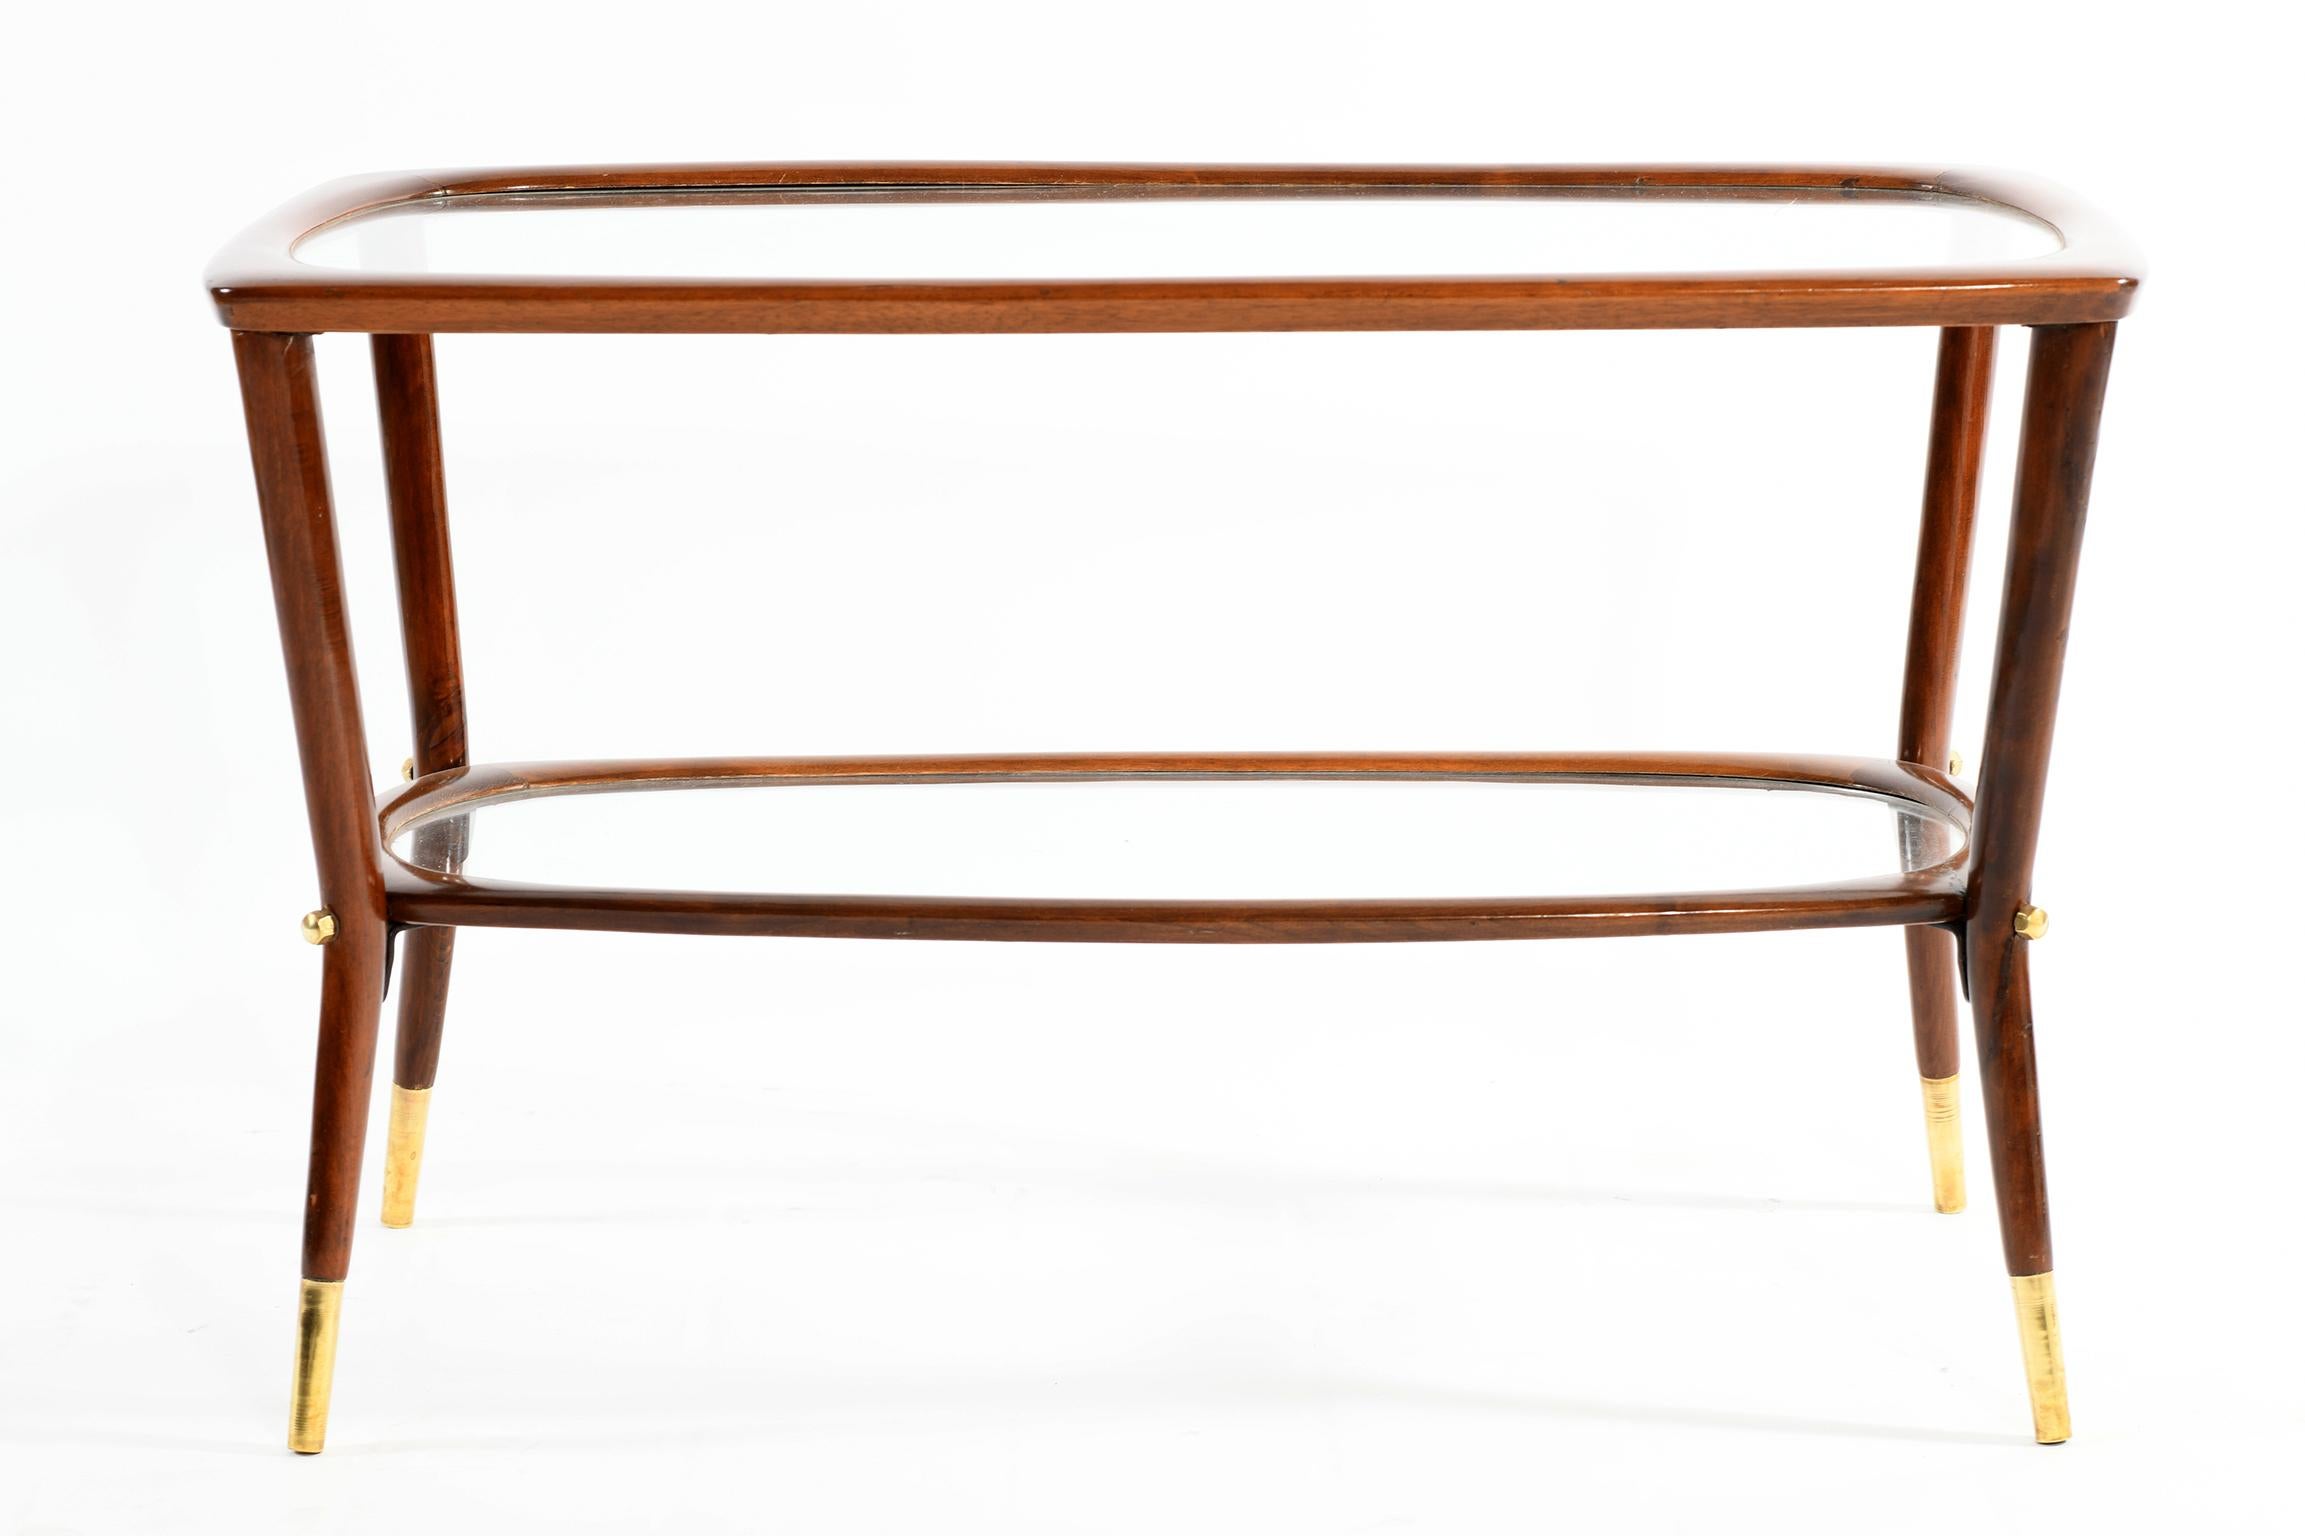 Mid-20th Century Midcentury Italian Coffee Table with Double Glass Shelf and Brass Details